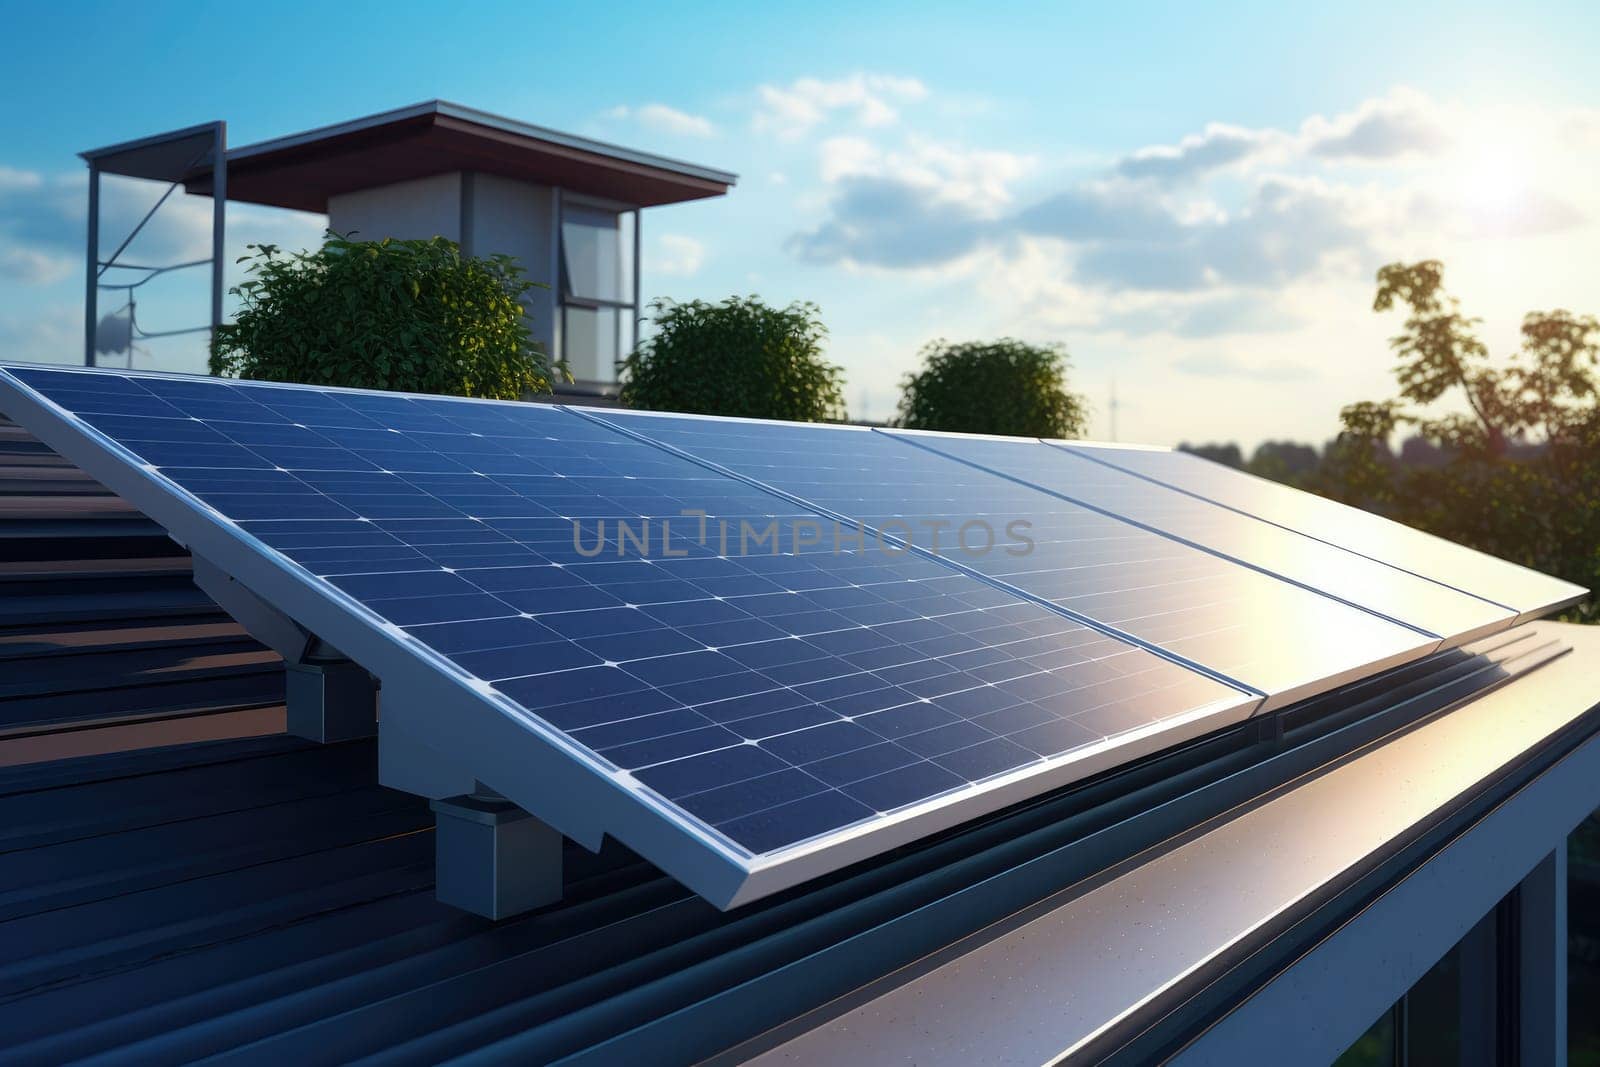 A high-angle view of solar panel installation on the rooftop of a modern building, capturing the utilization of renewable energy for sustainable power generation.